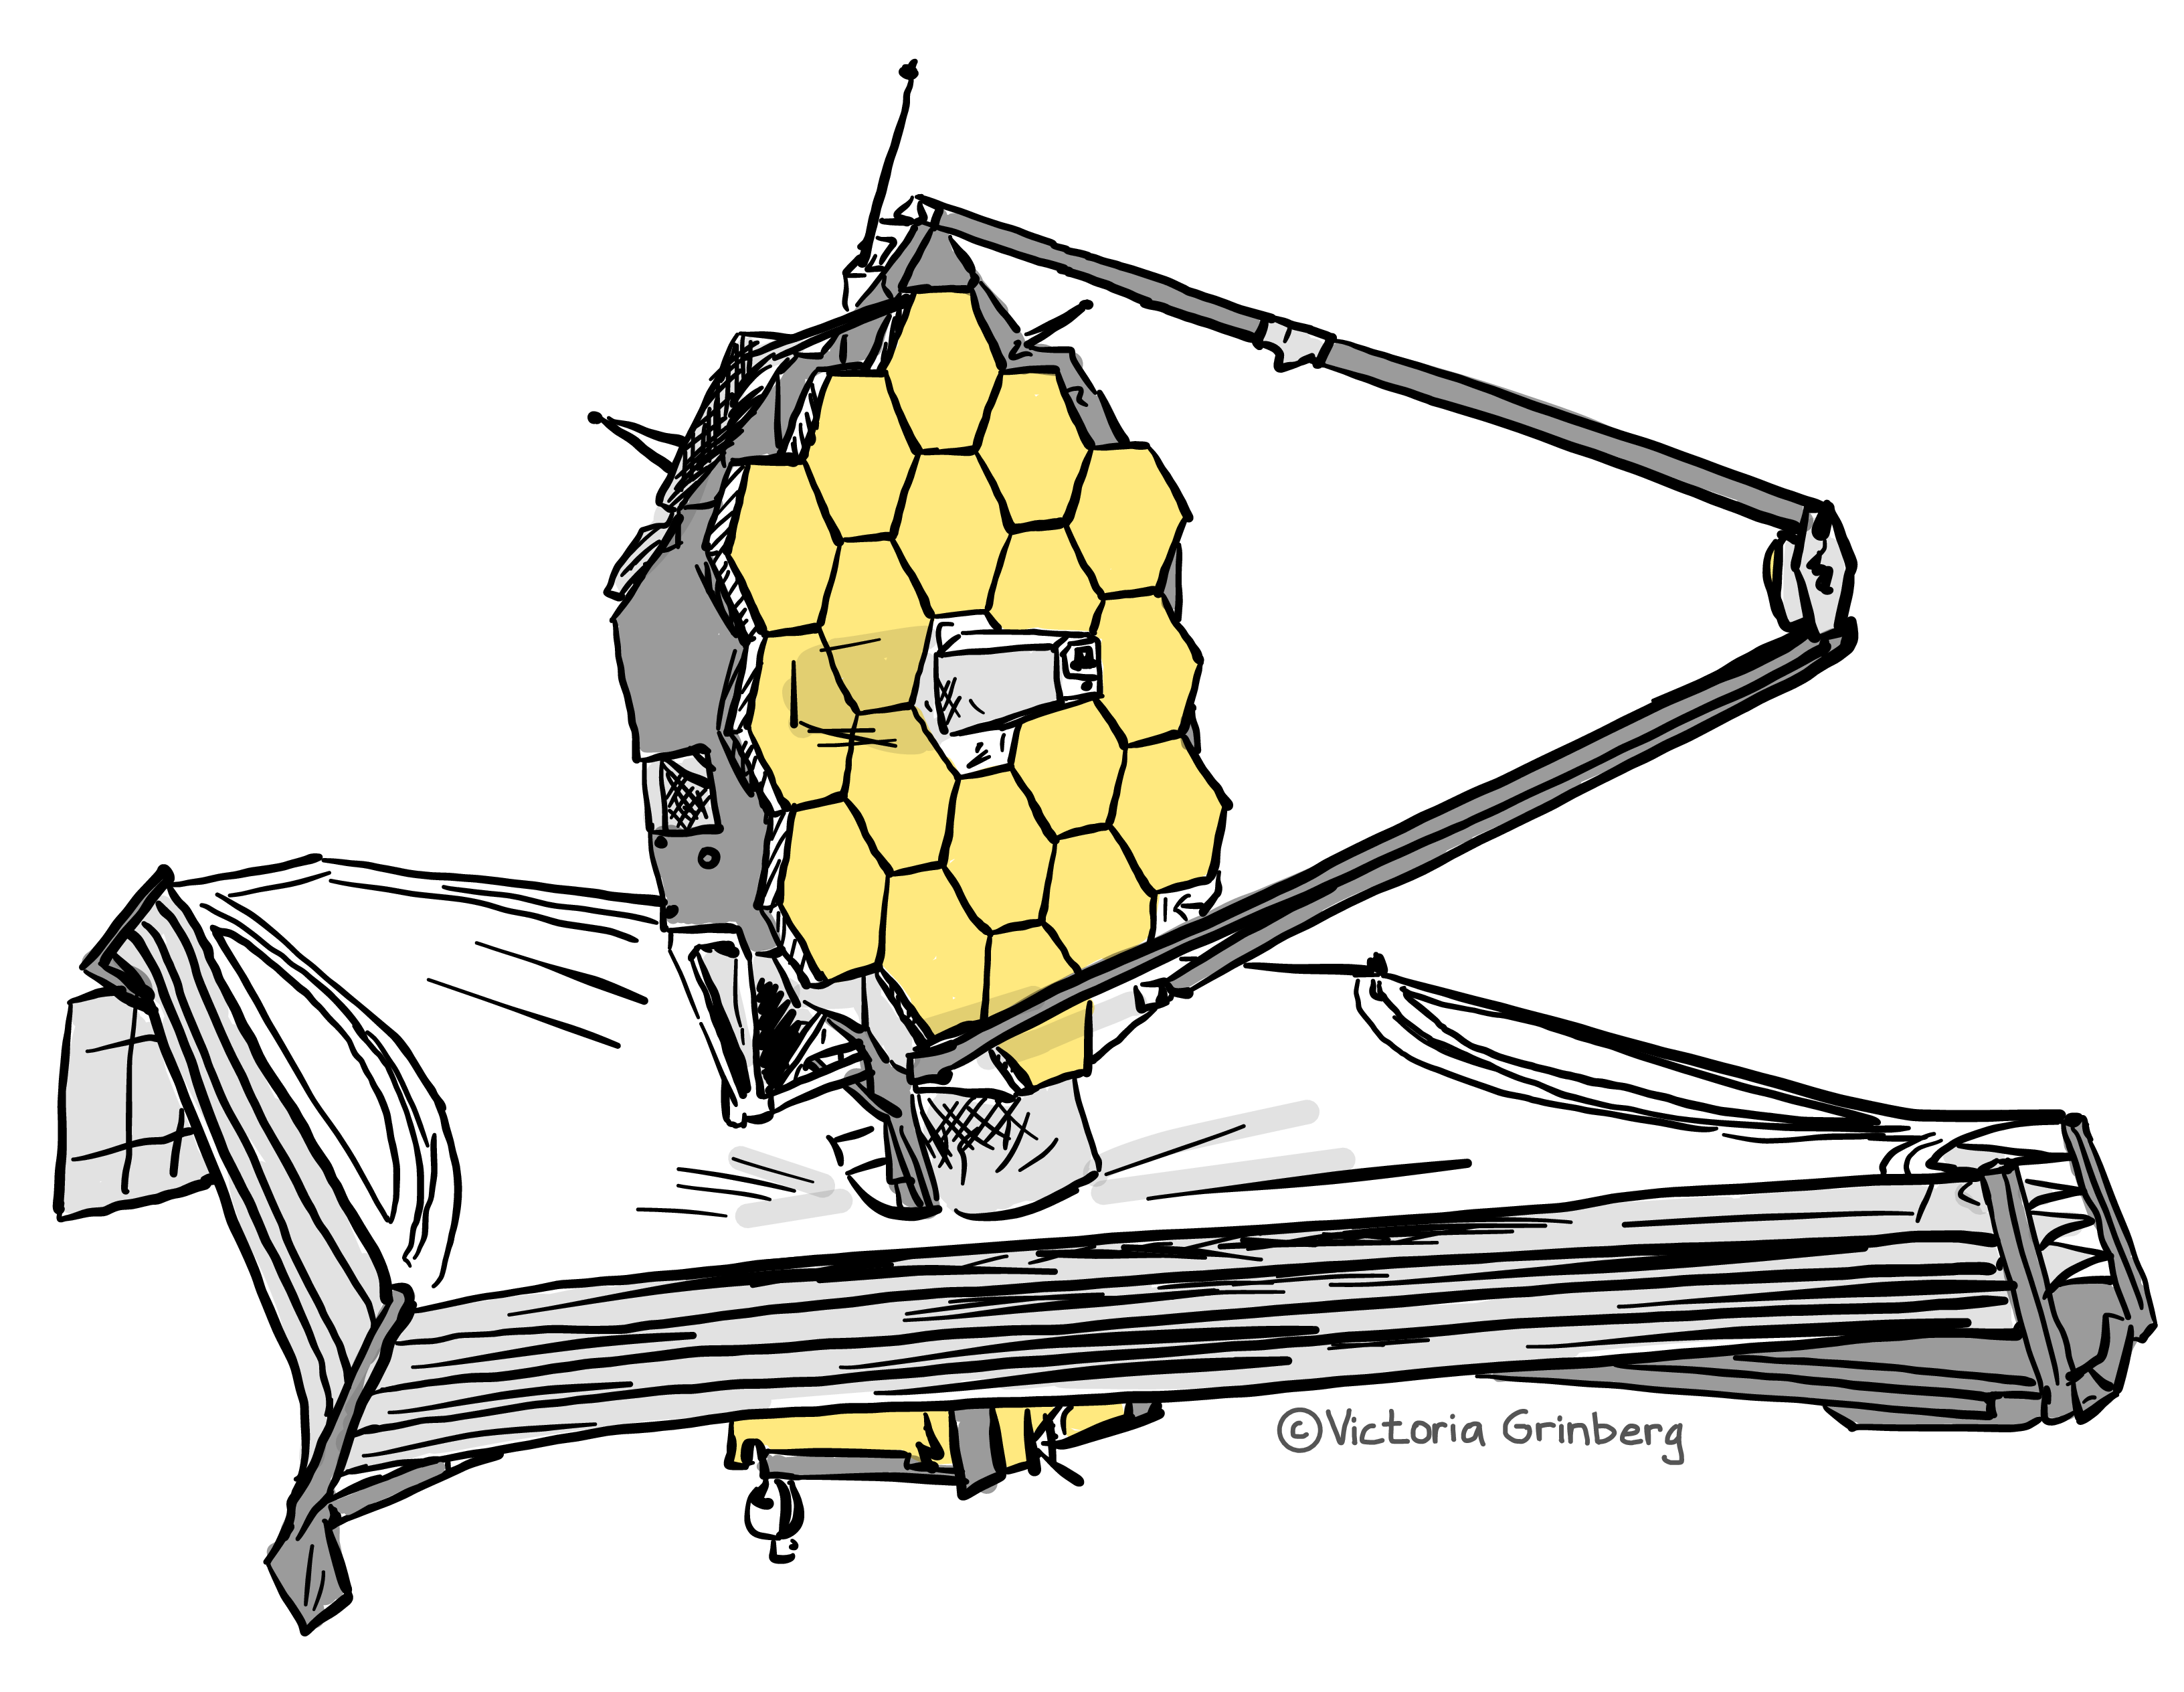 Mostly flack and white digital drawing of the JWST, with gold highlight for the mirror and some of the electronics.